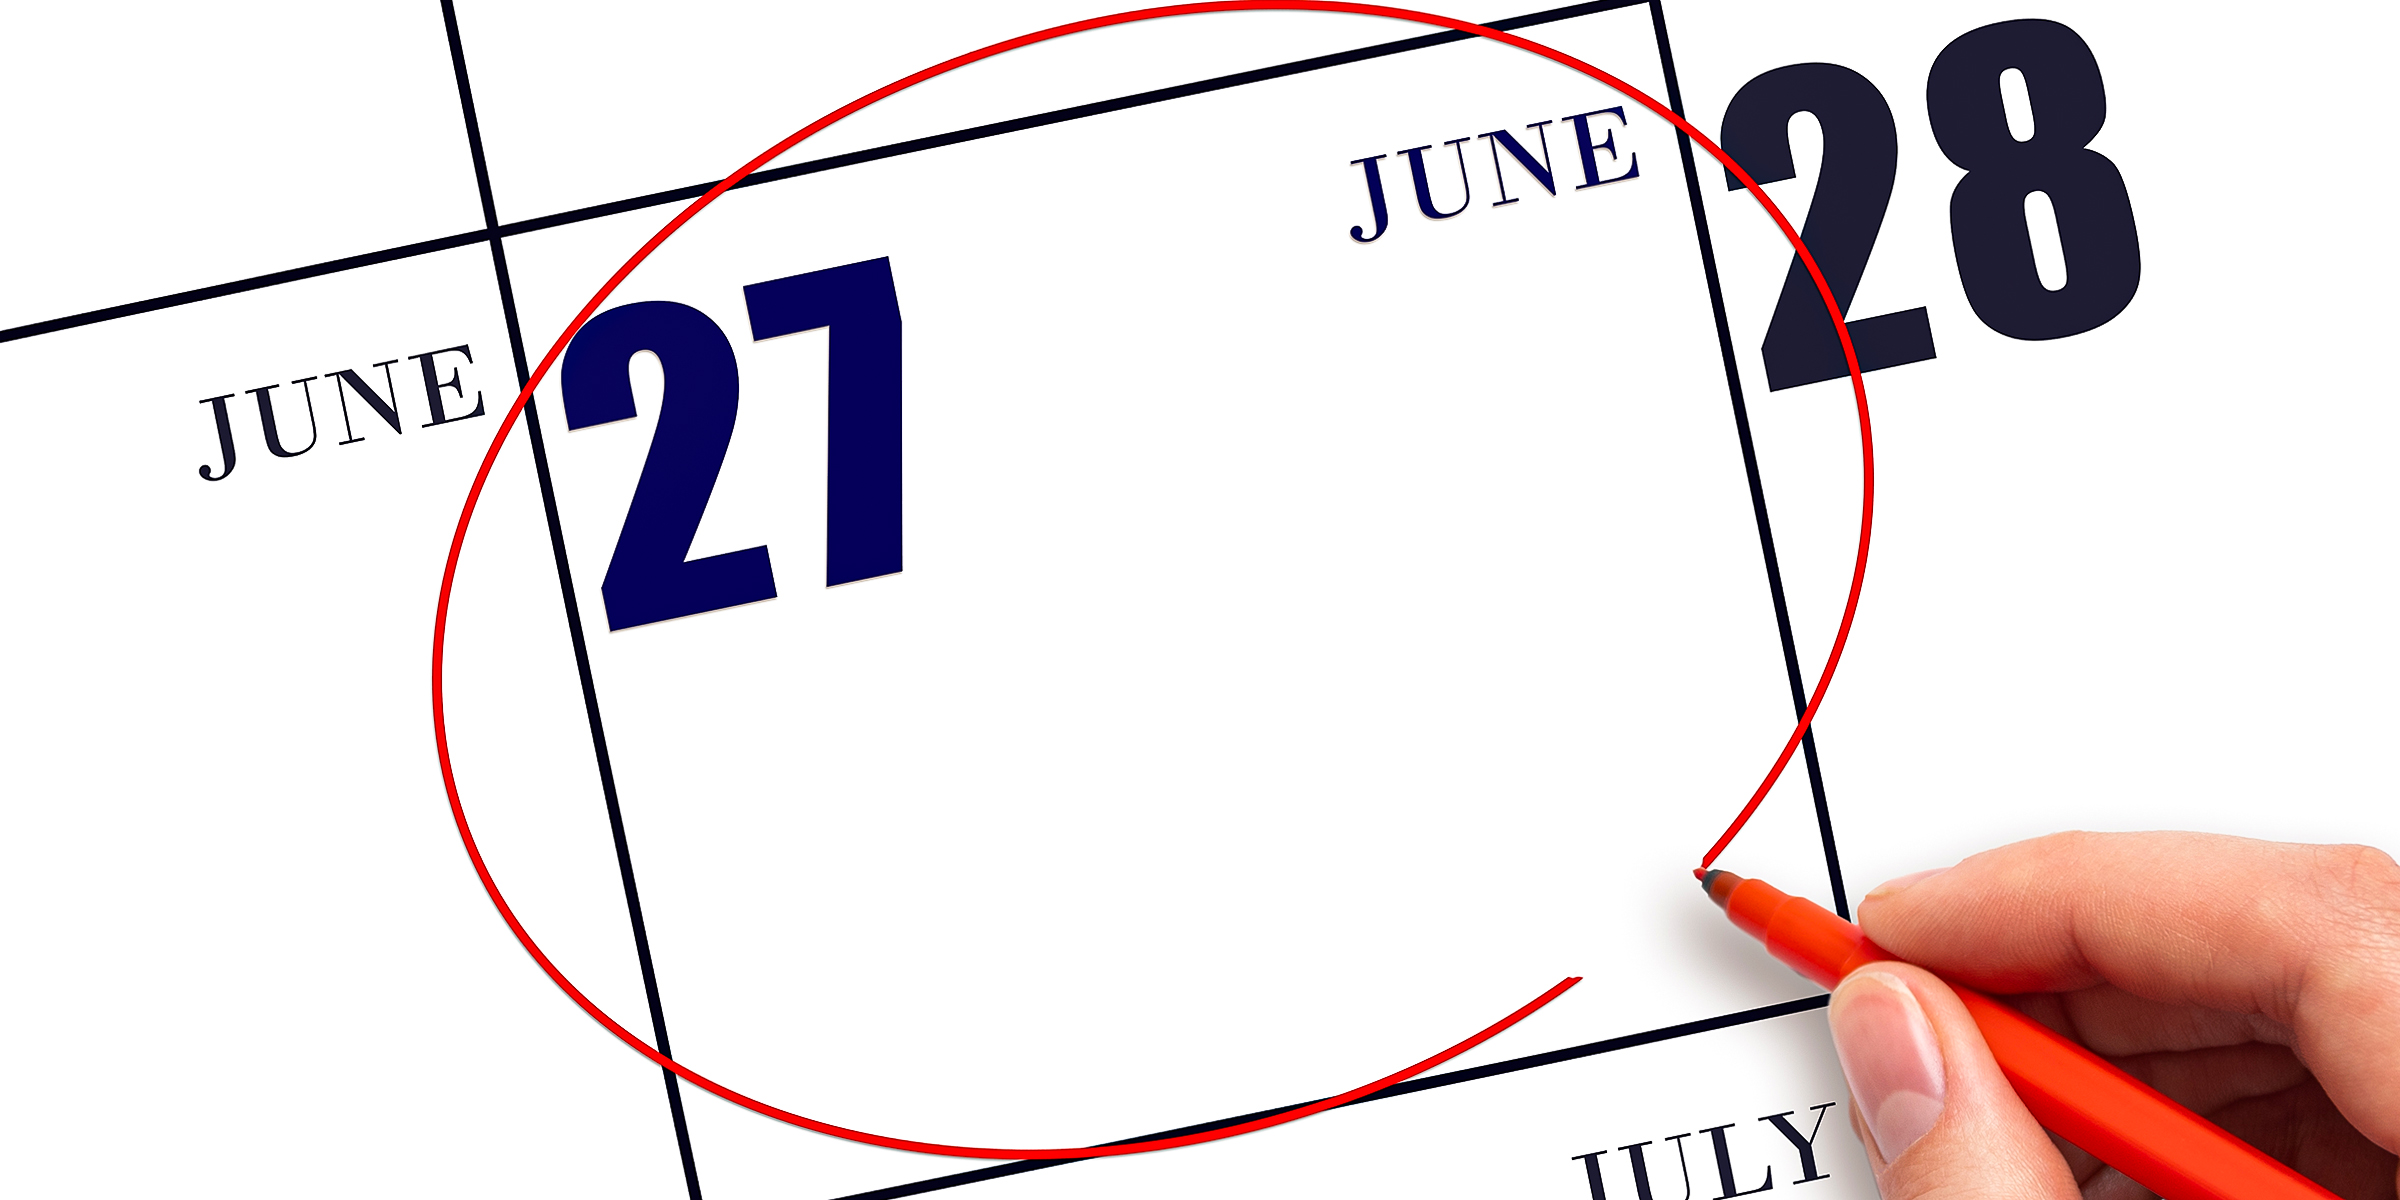 A calendar with the date June 27th circled | Source: Shutterstock